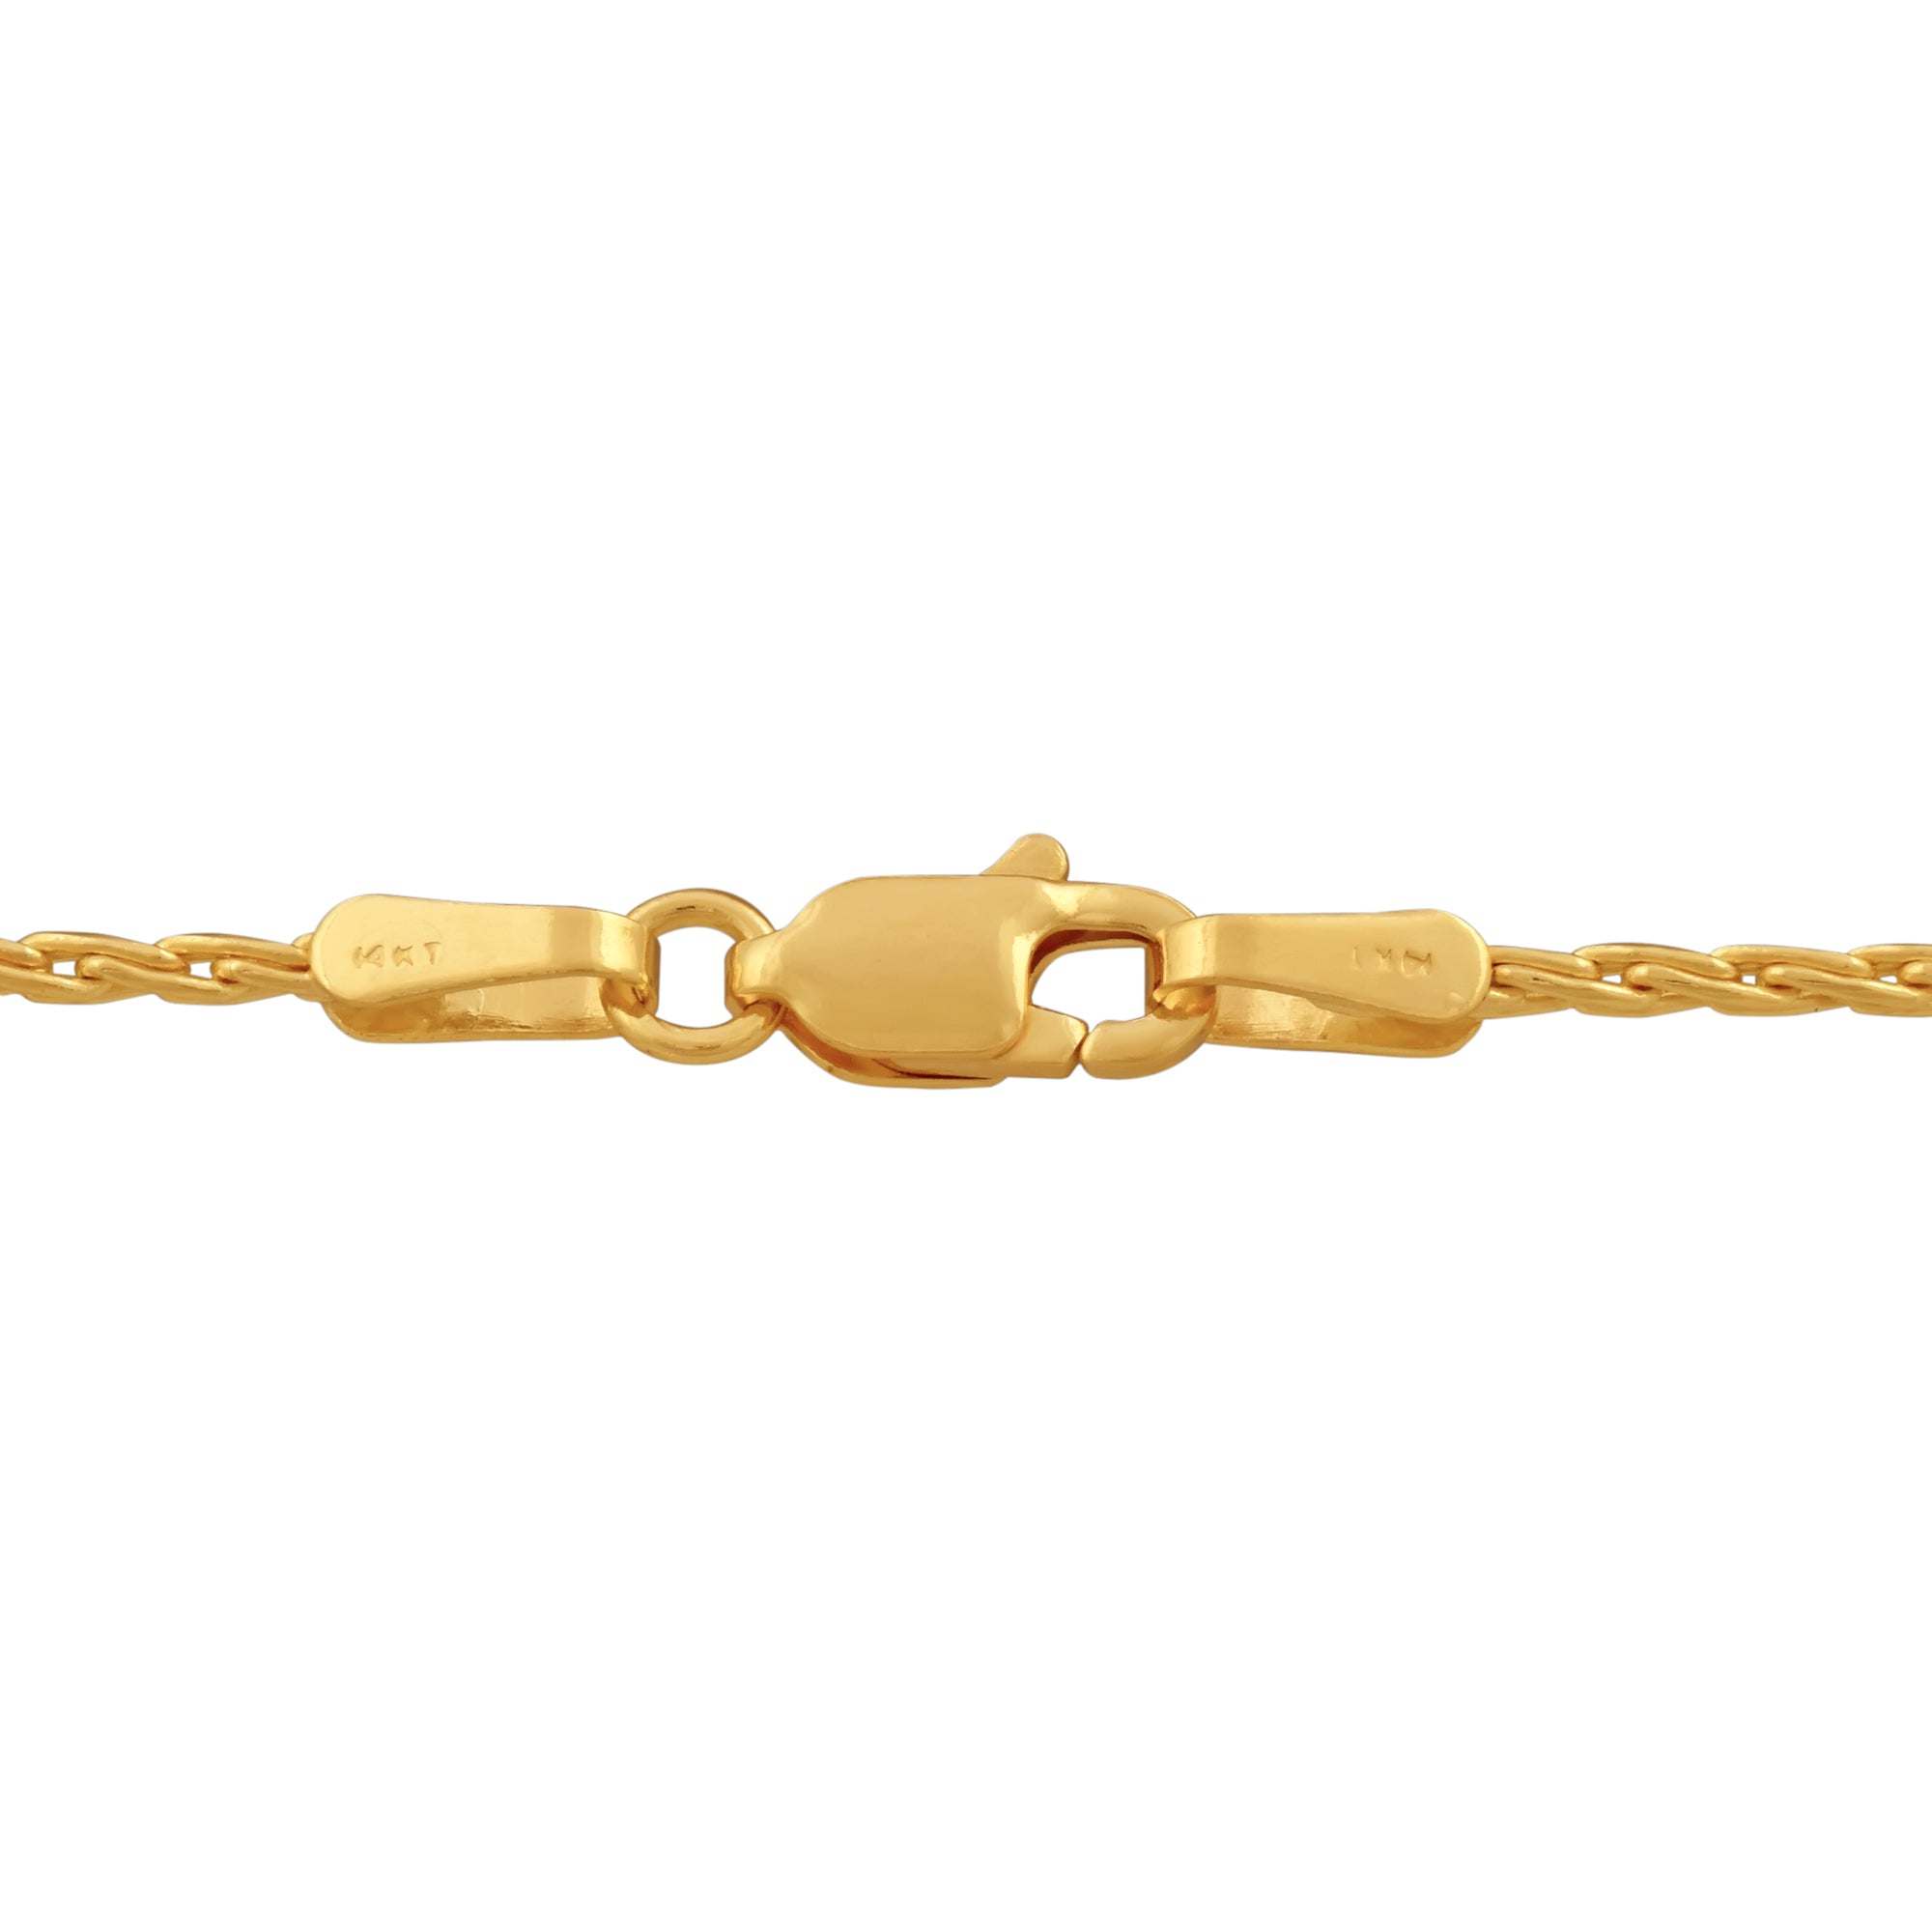 Parisian Wheat Chain in 14kt Yellow Gold (24 inches and 1.4mm wide)